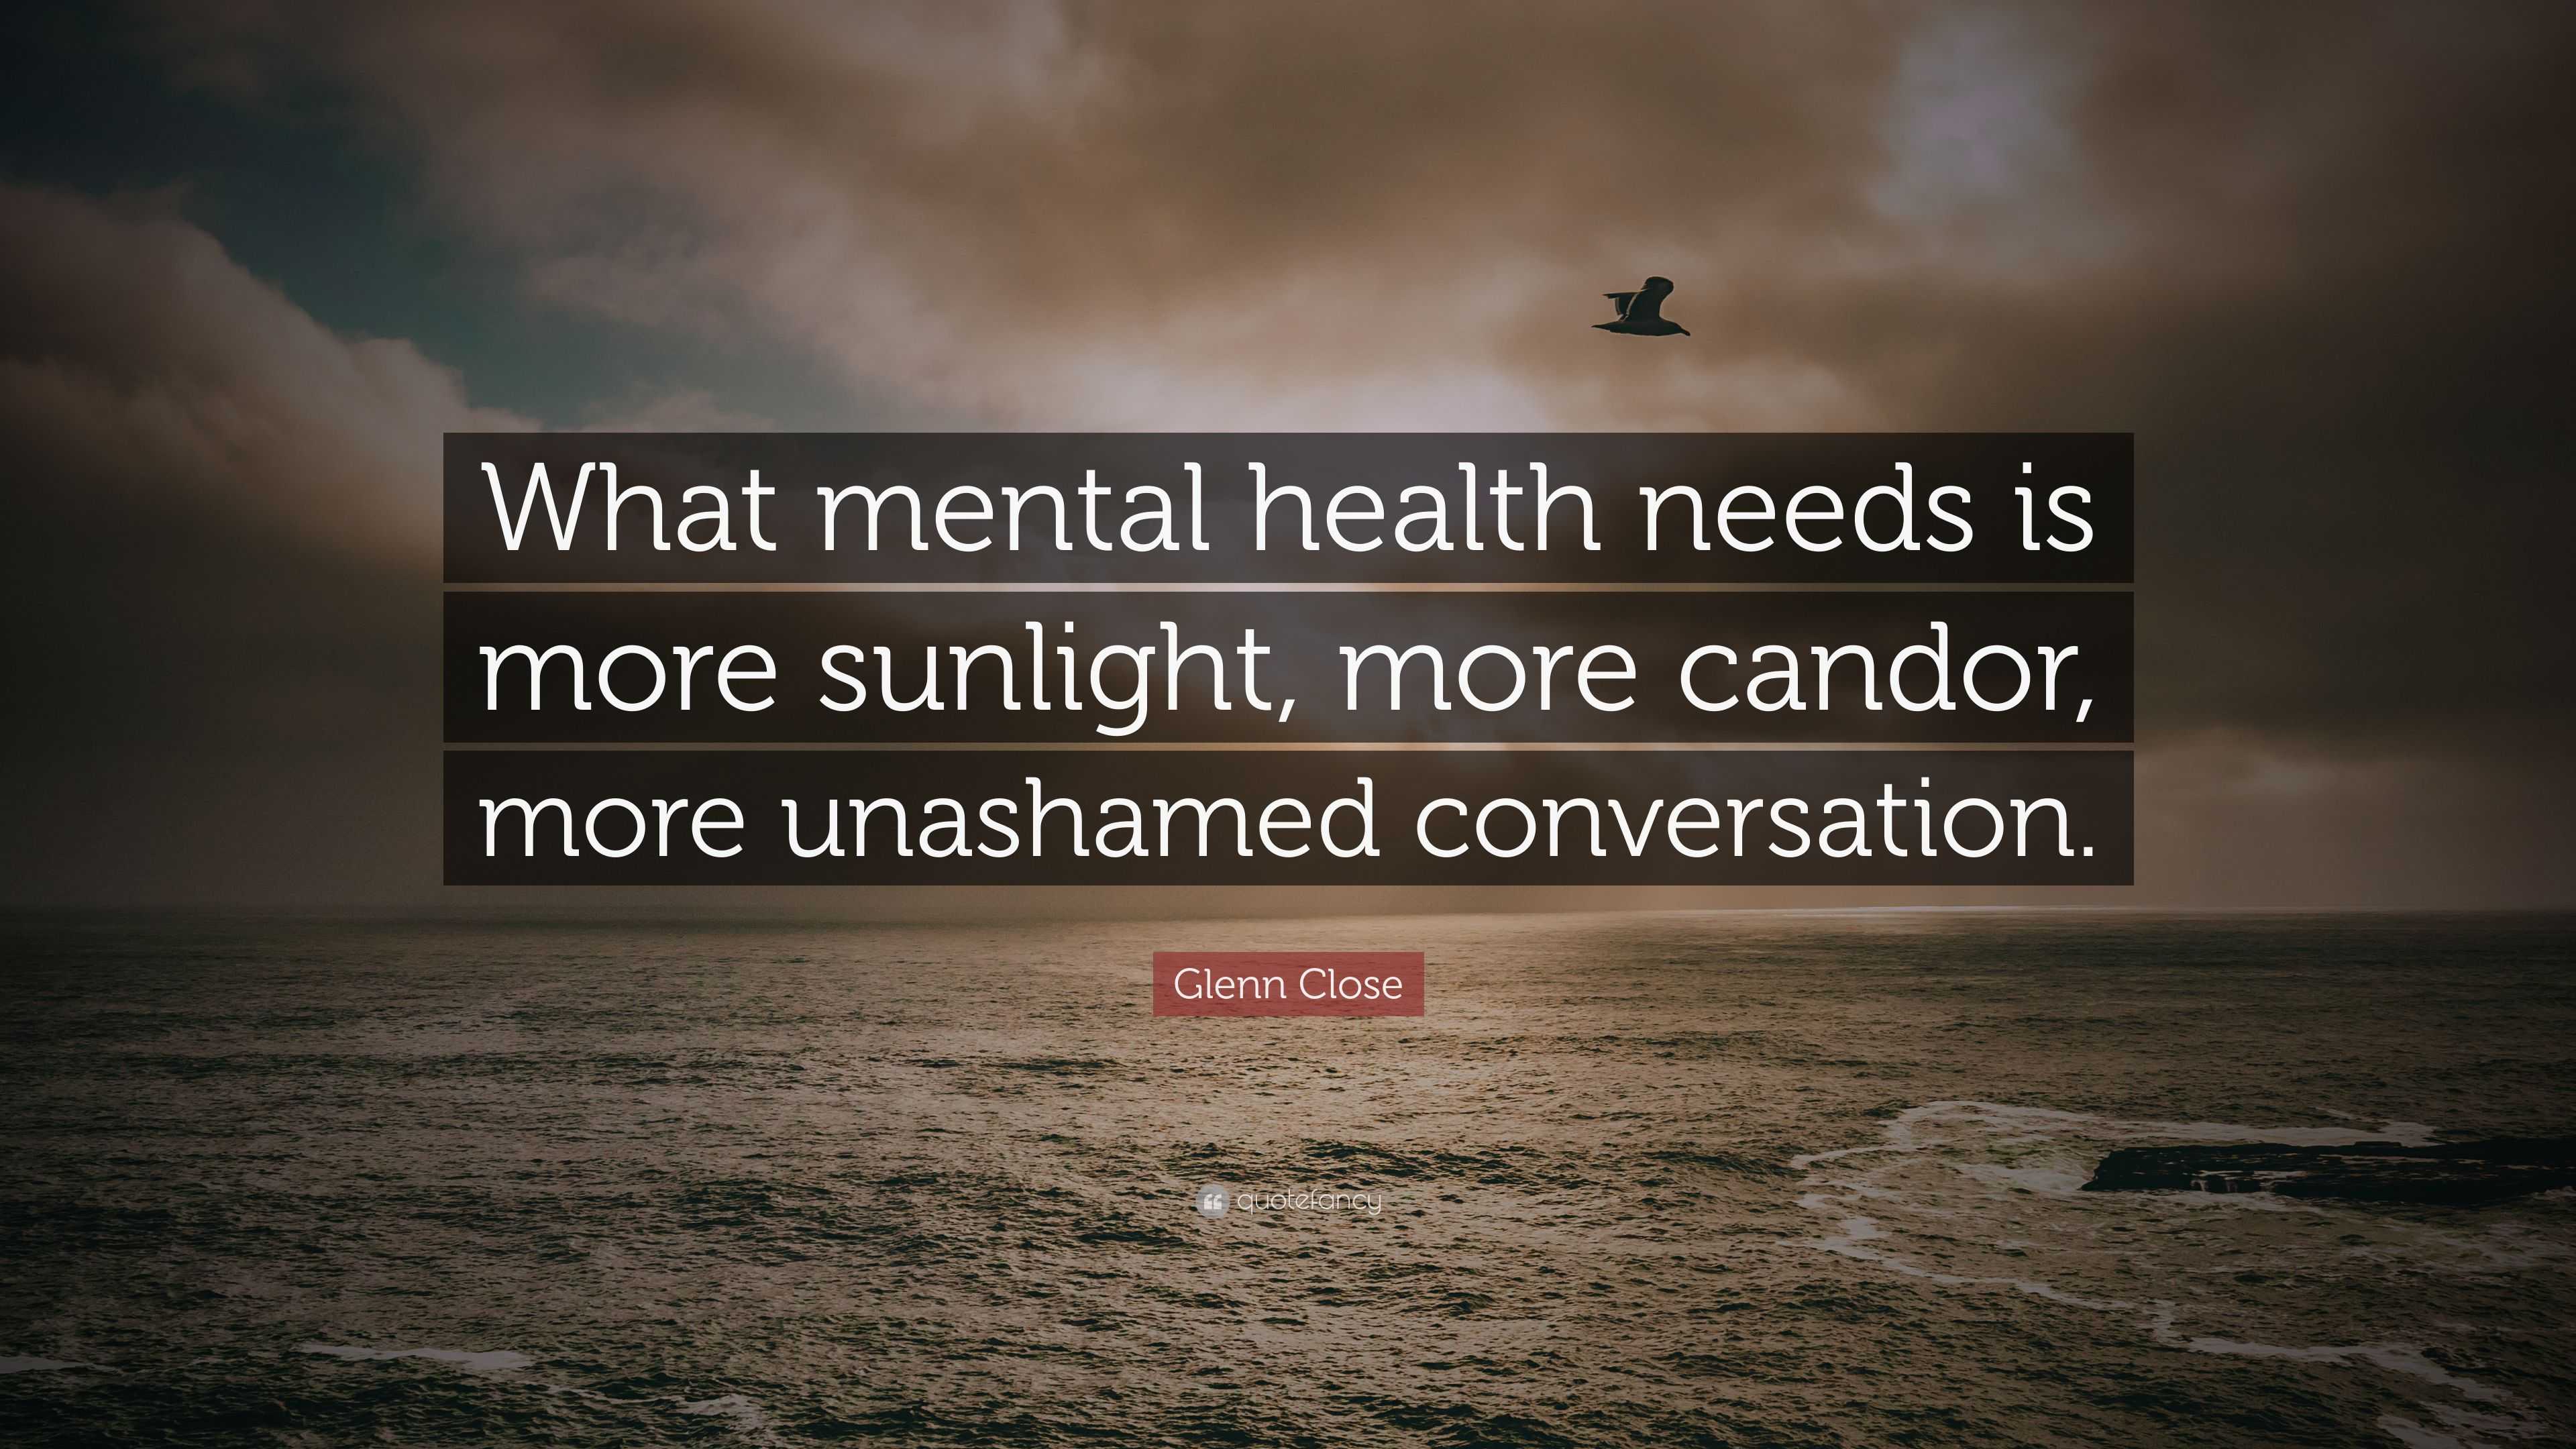 Glenn Close Quote: “What mental health needs is more sunlight, more